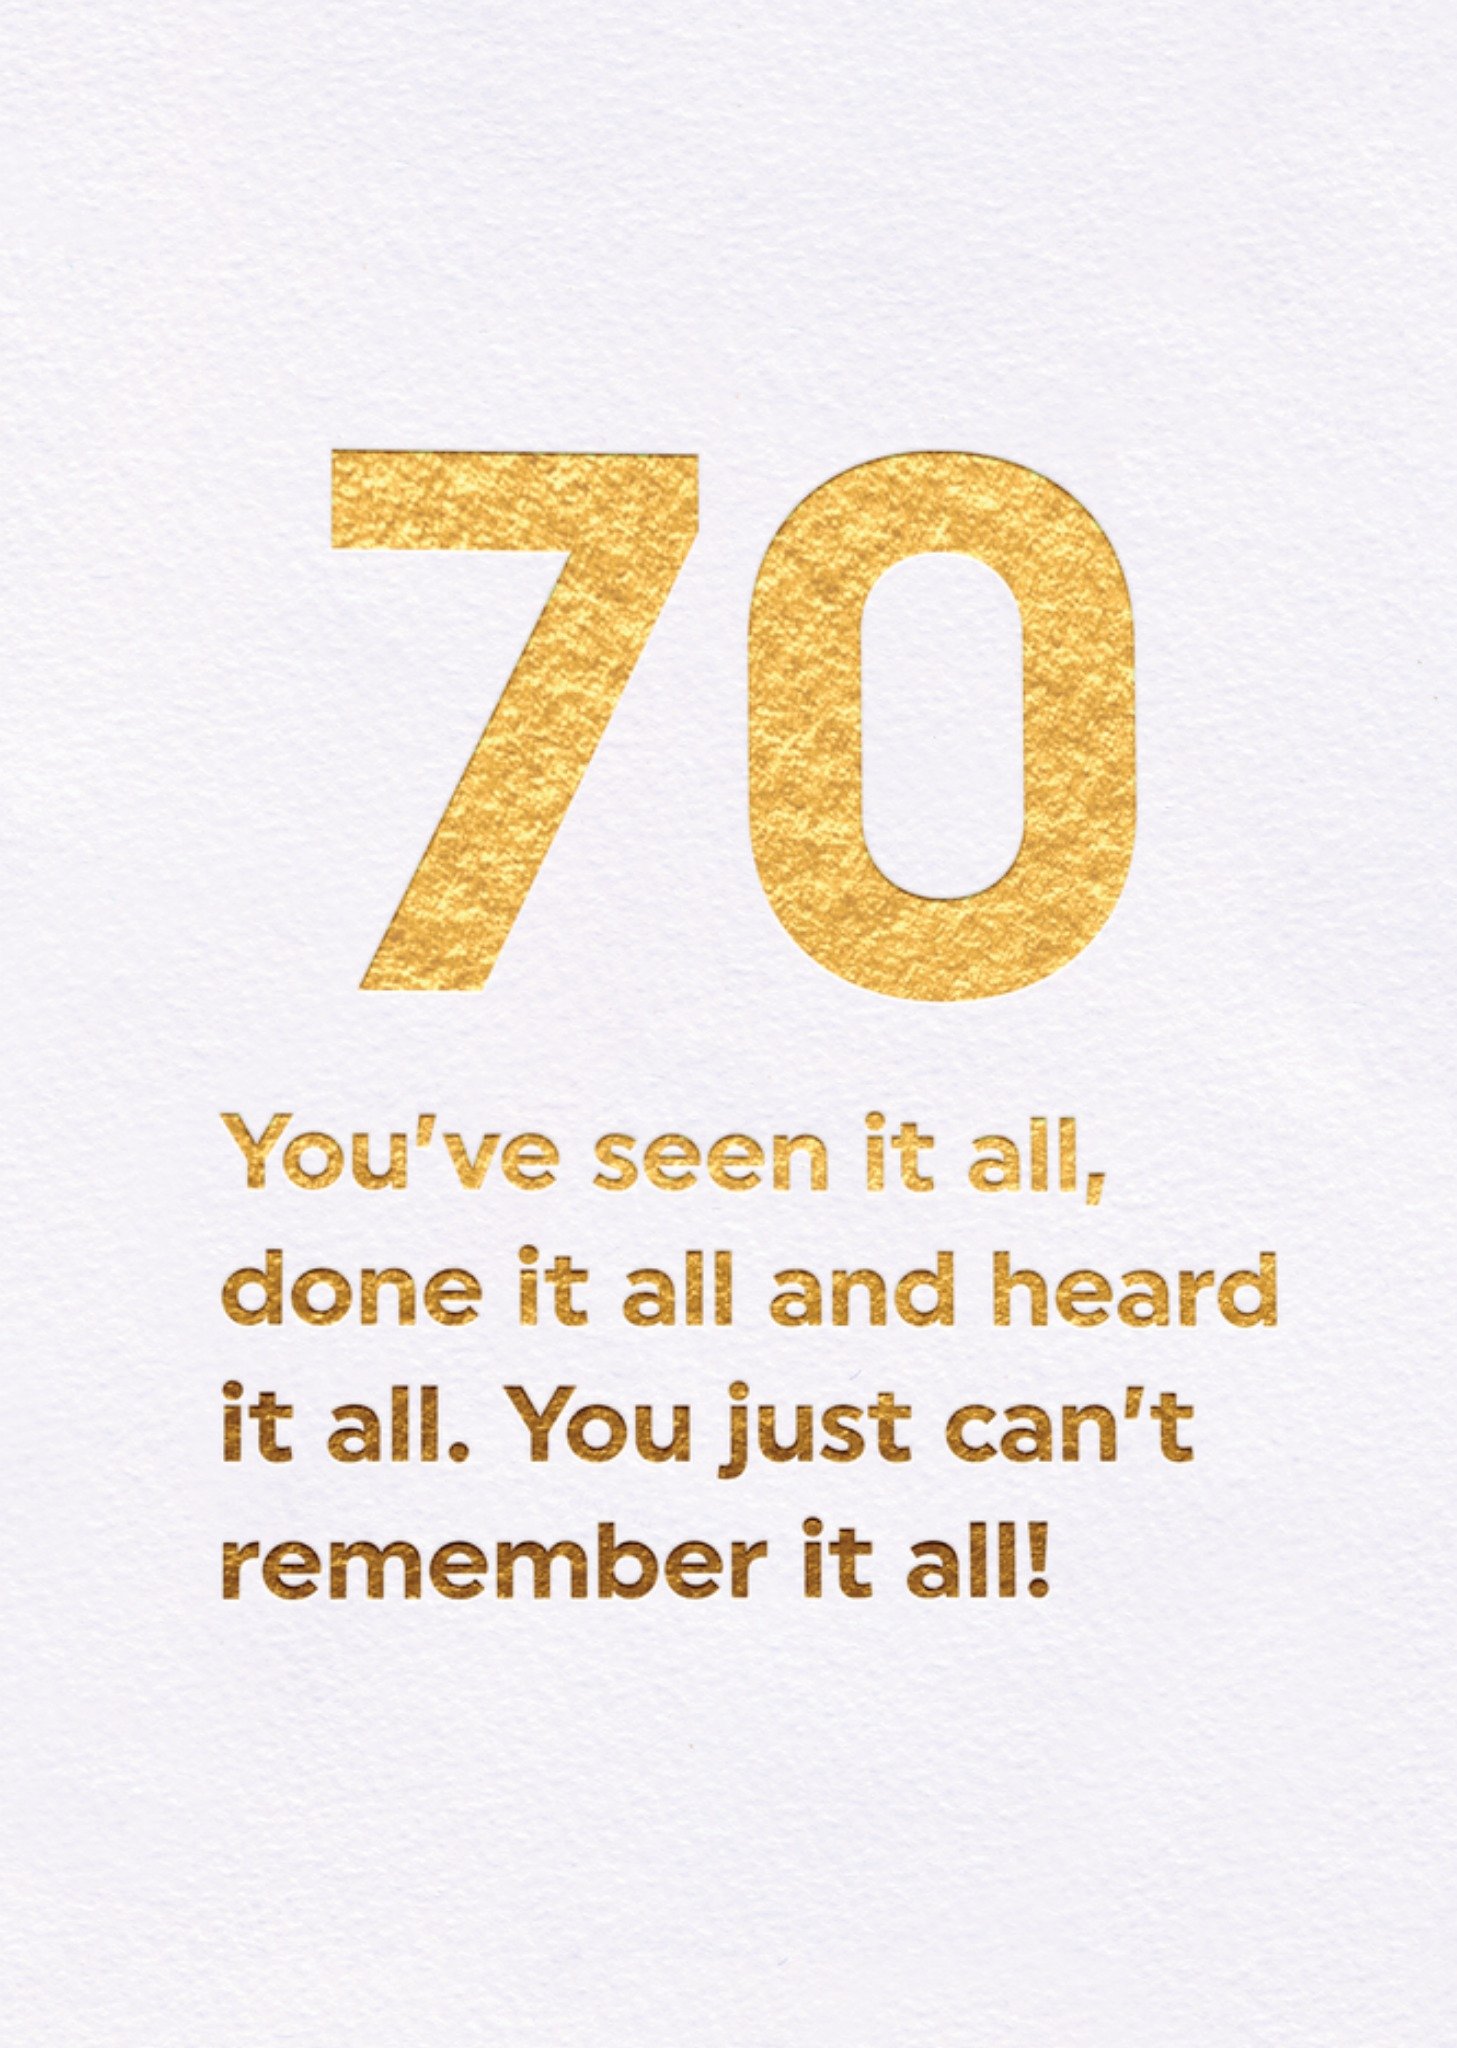 Brainbox Candy You've Seen It All, Done It All And Heard It All 70th Birthday Card Ecard